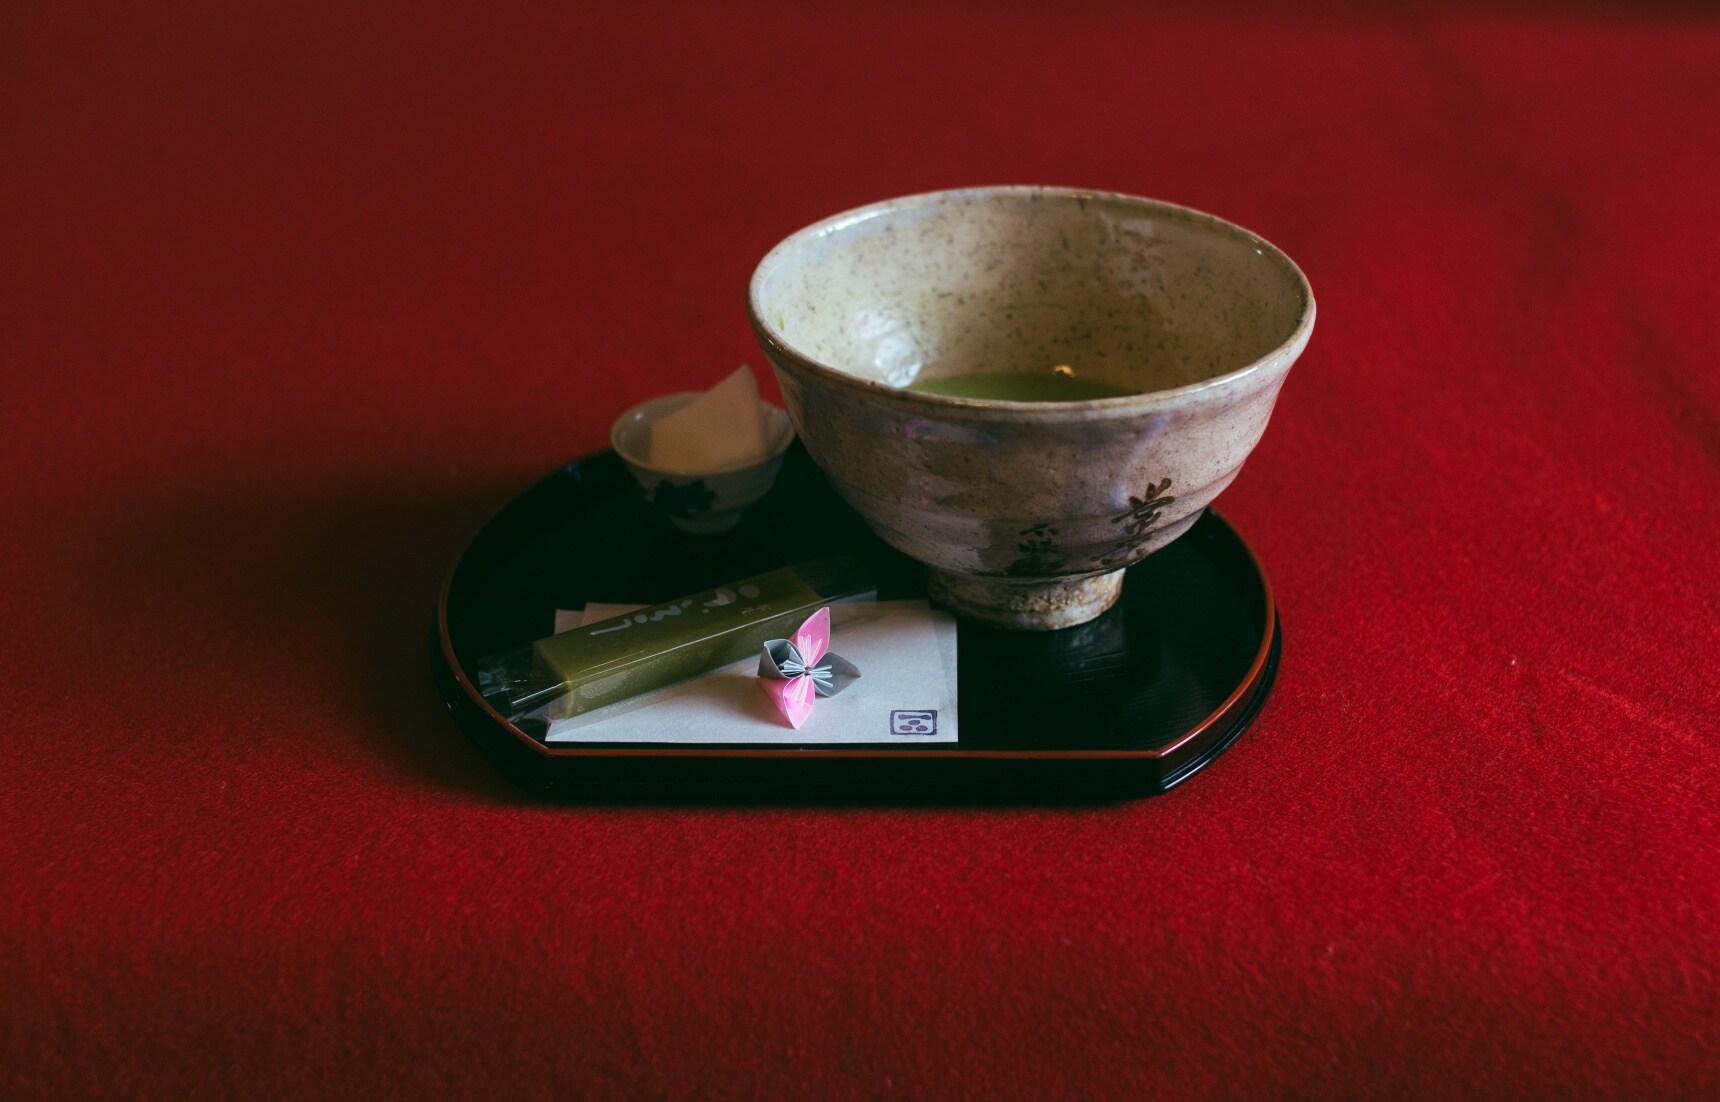 All About Japan’s Top Five Tea-Producing Regions